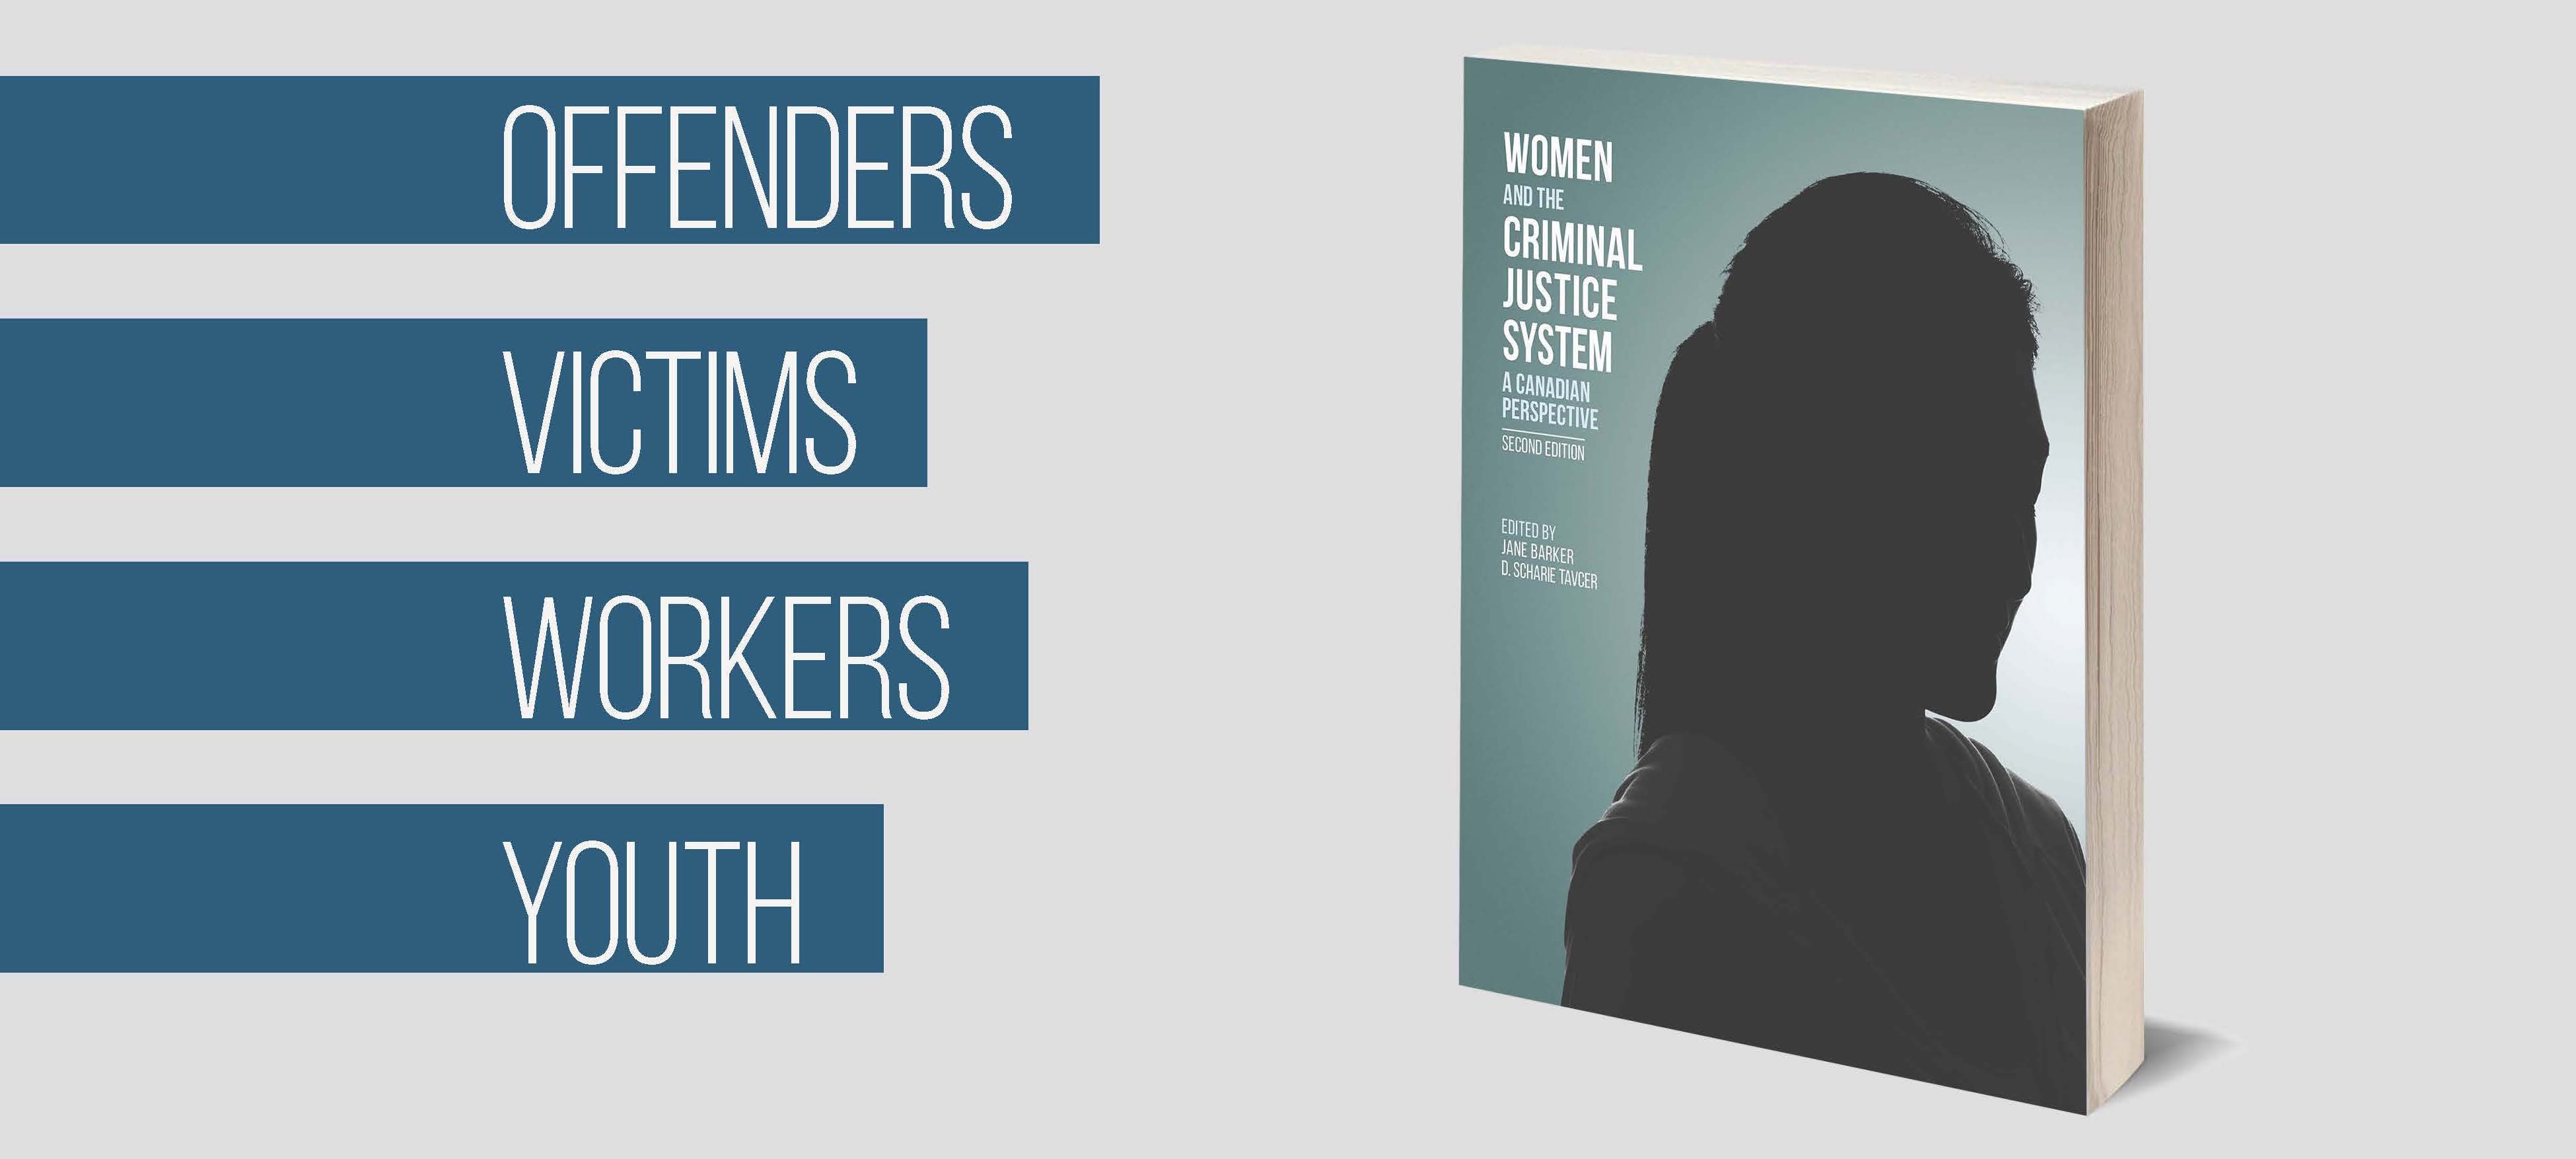 Women and the Criminal Justice System Book Launch